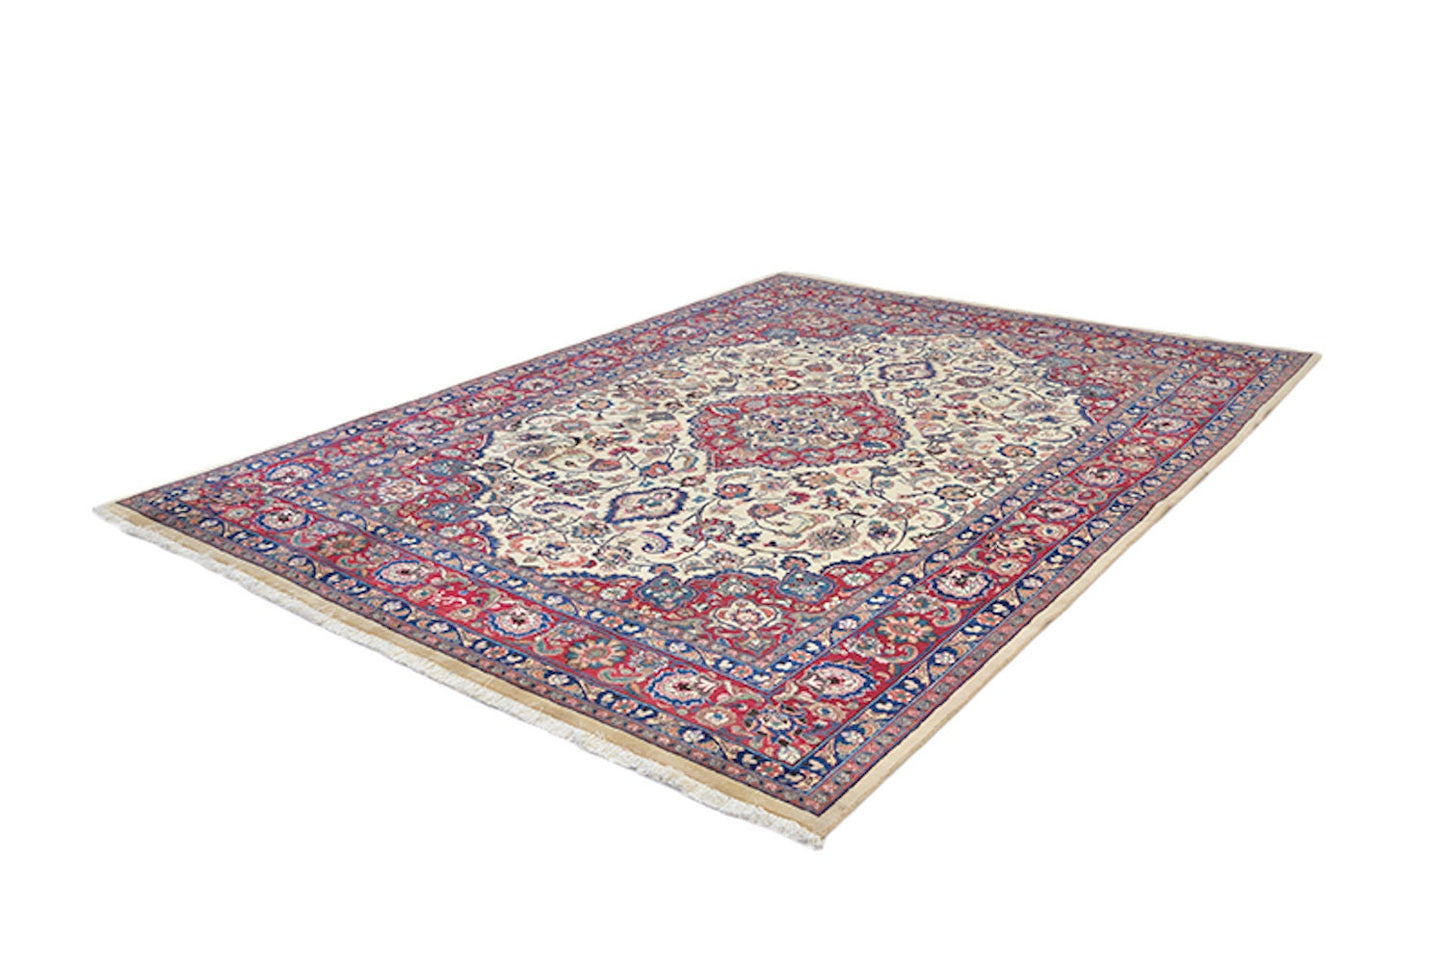 Large Red Persian 8x11 Rug with Beige Medallion | Hand Knotted with Oriental Design | Blue and Red Border | Luxury Wool & Cotton Rug